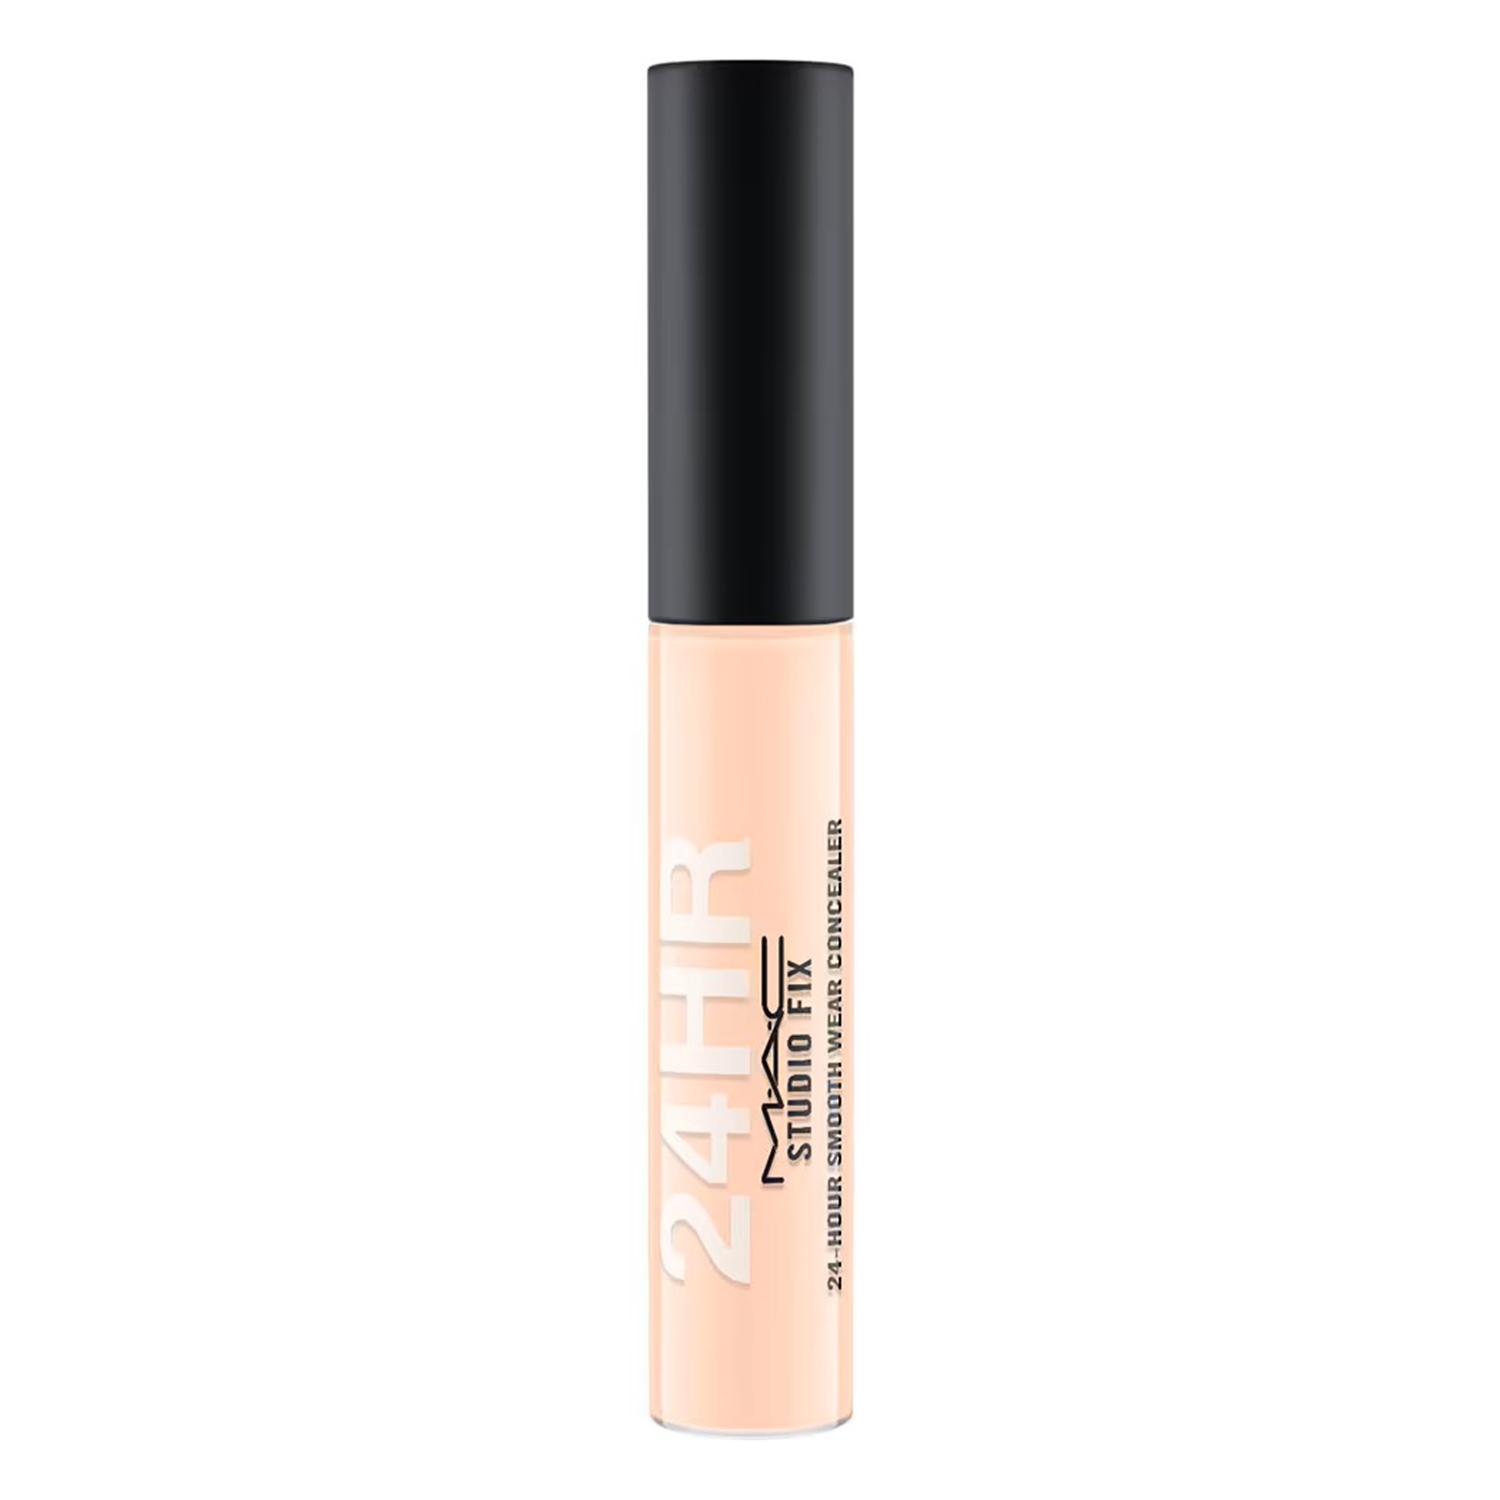 M.A.C | M.A.C Studio Fix 24-Hour Smooth Wear Concealer - NW22 (7ml)